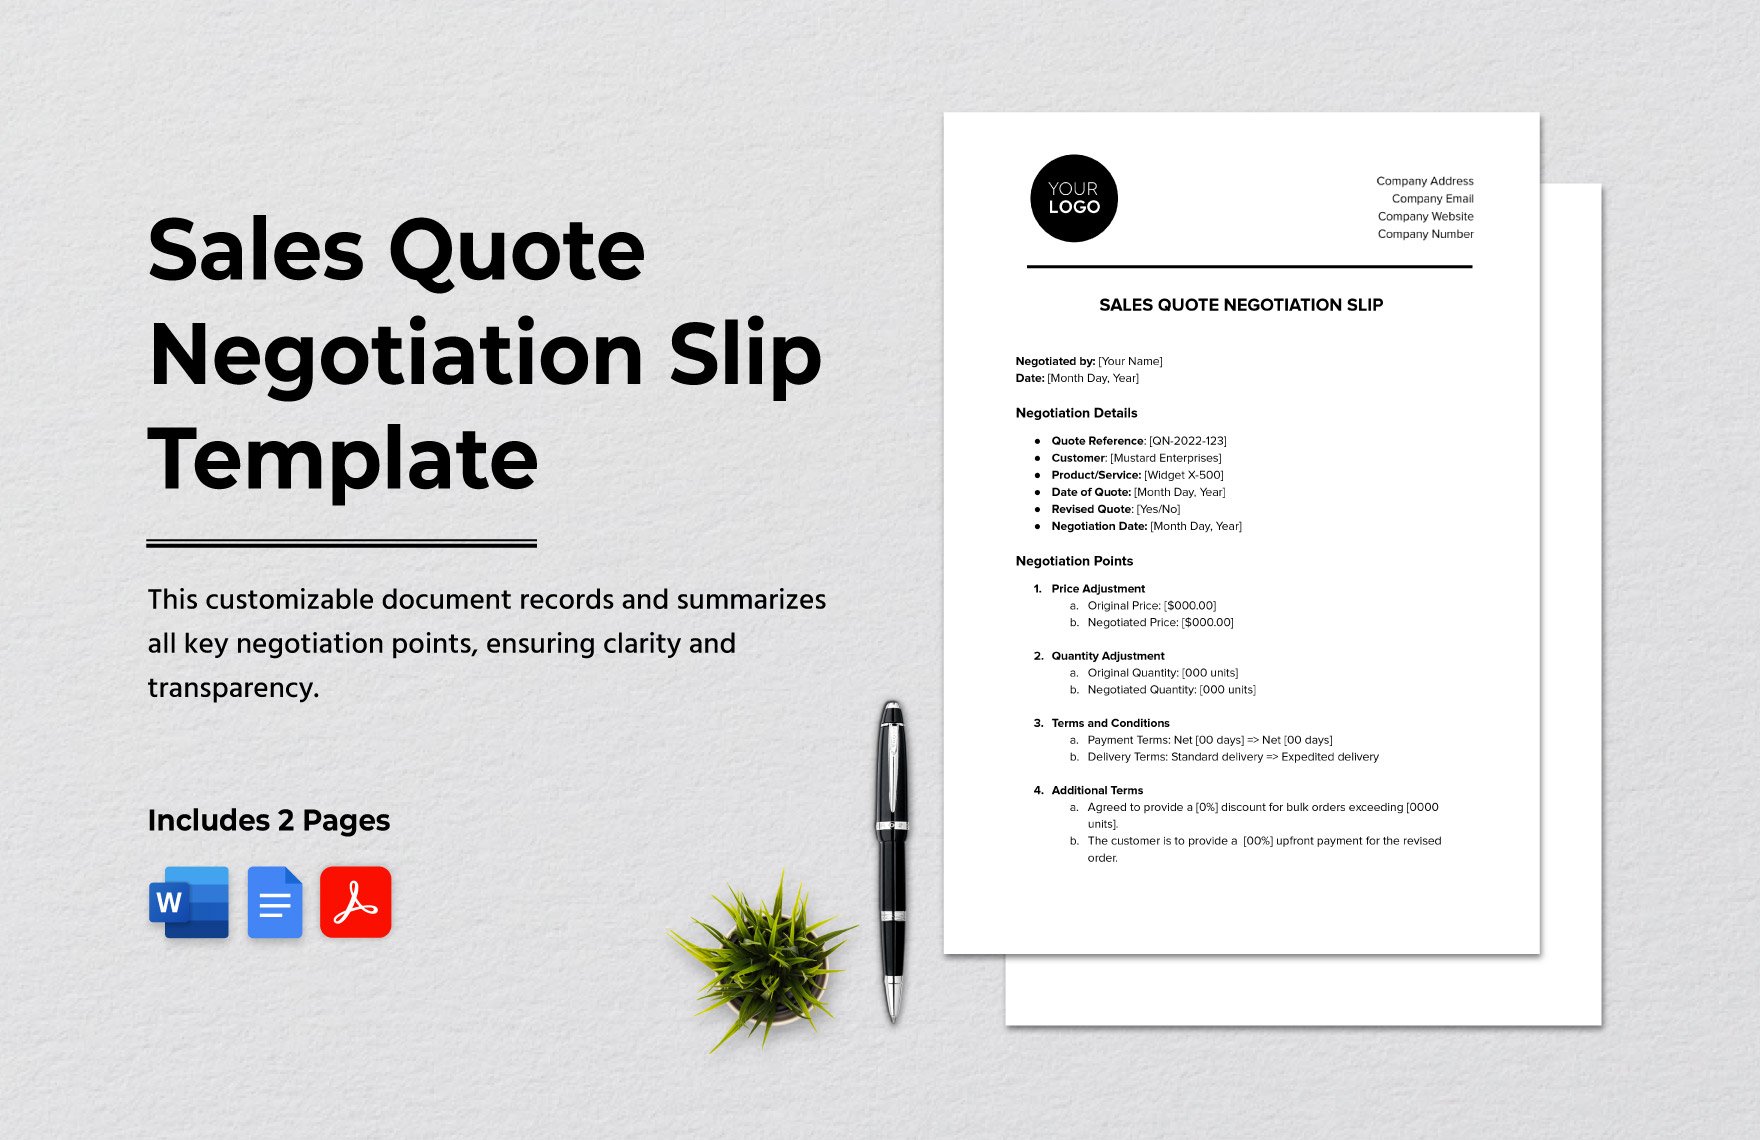 Sales Quote Negotiation Slip Template in Word, Google Docs, PDF